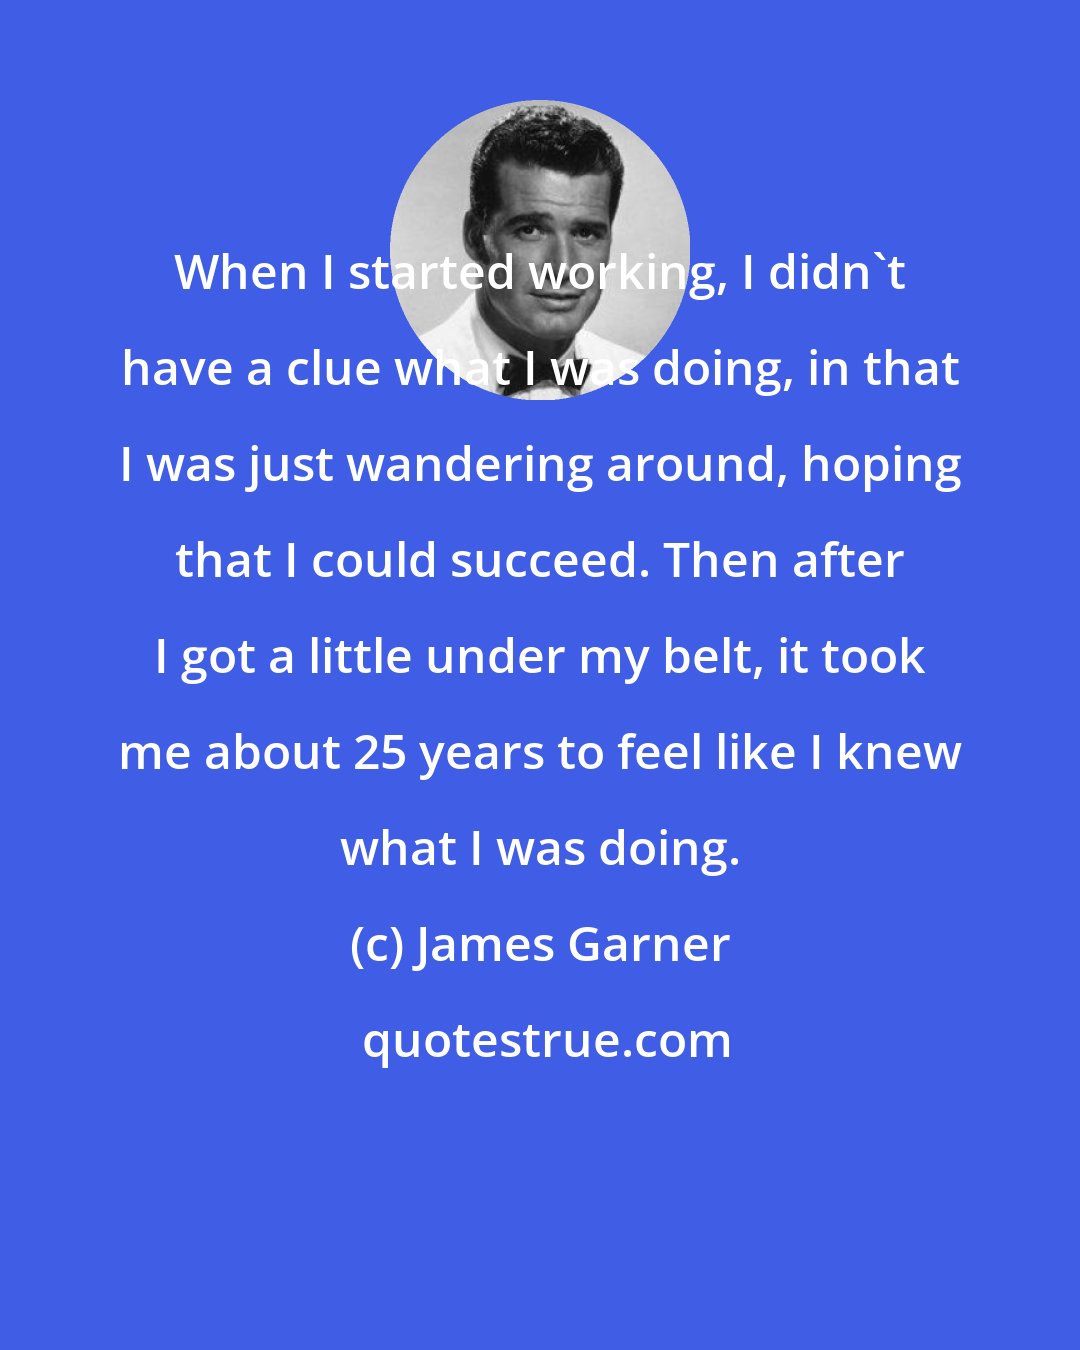 James Garner: When I started working, I didn't have a clue what I was doing, in that I was just wandering around, hoping that I could succeed. Then after I got a little under my belt, it took me about 25 years to feel like I knew what I was doing.